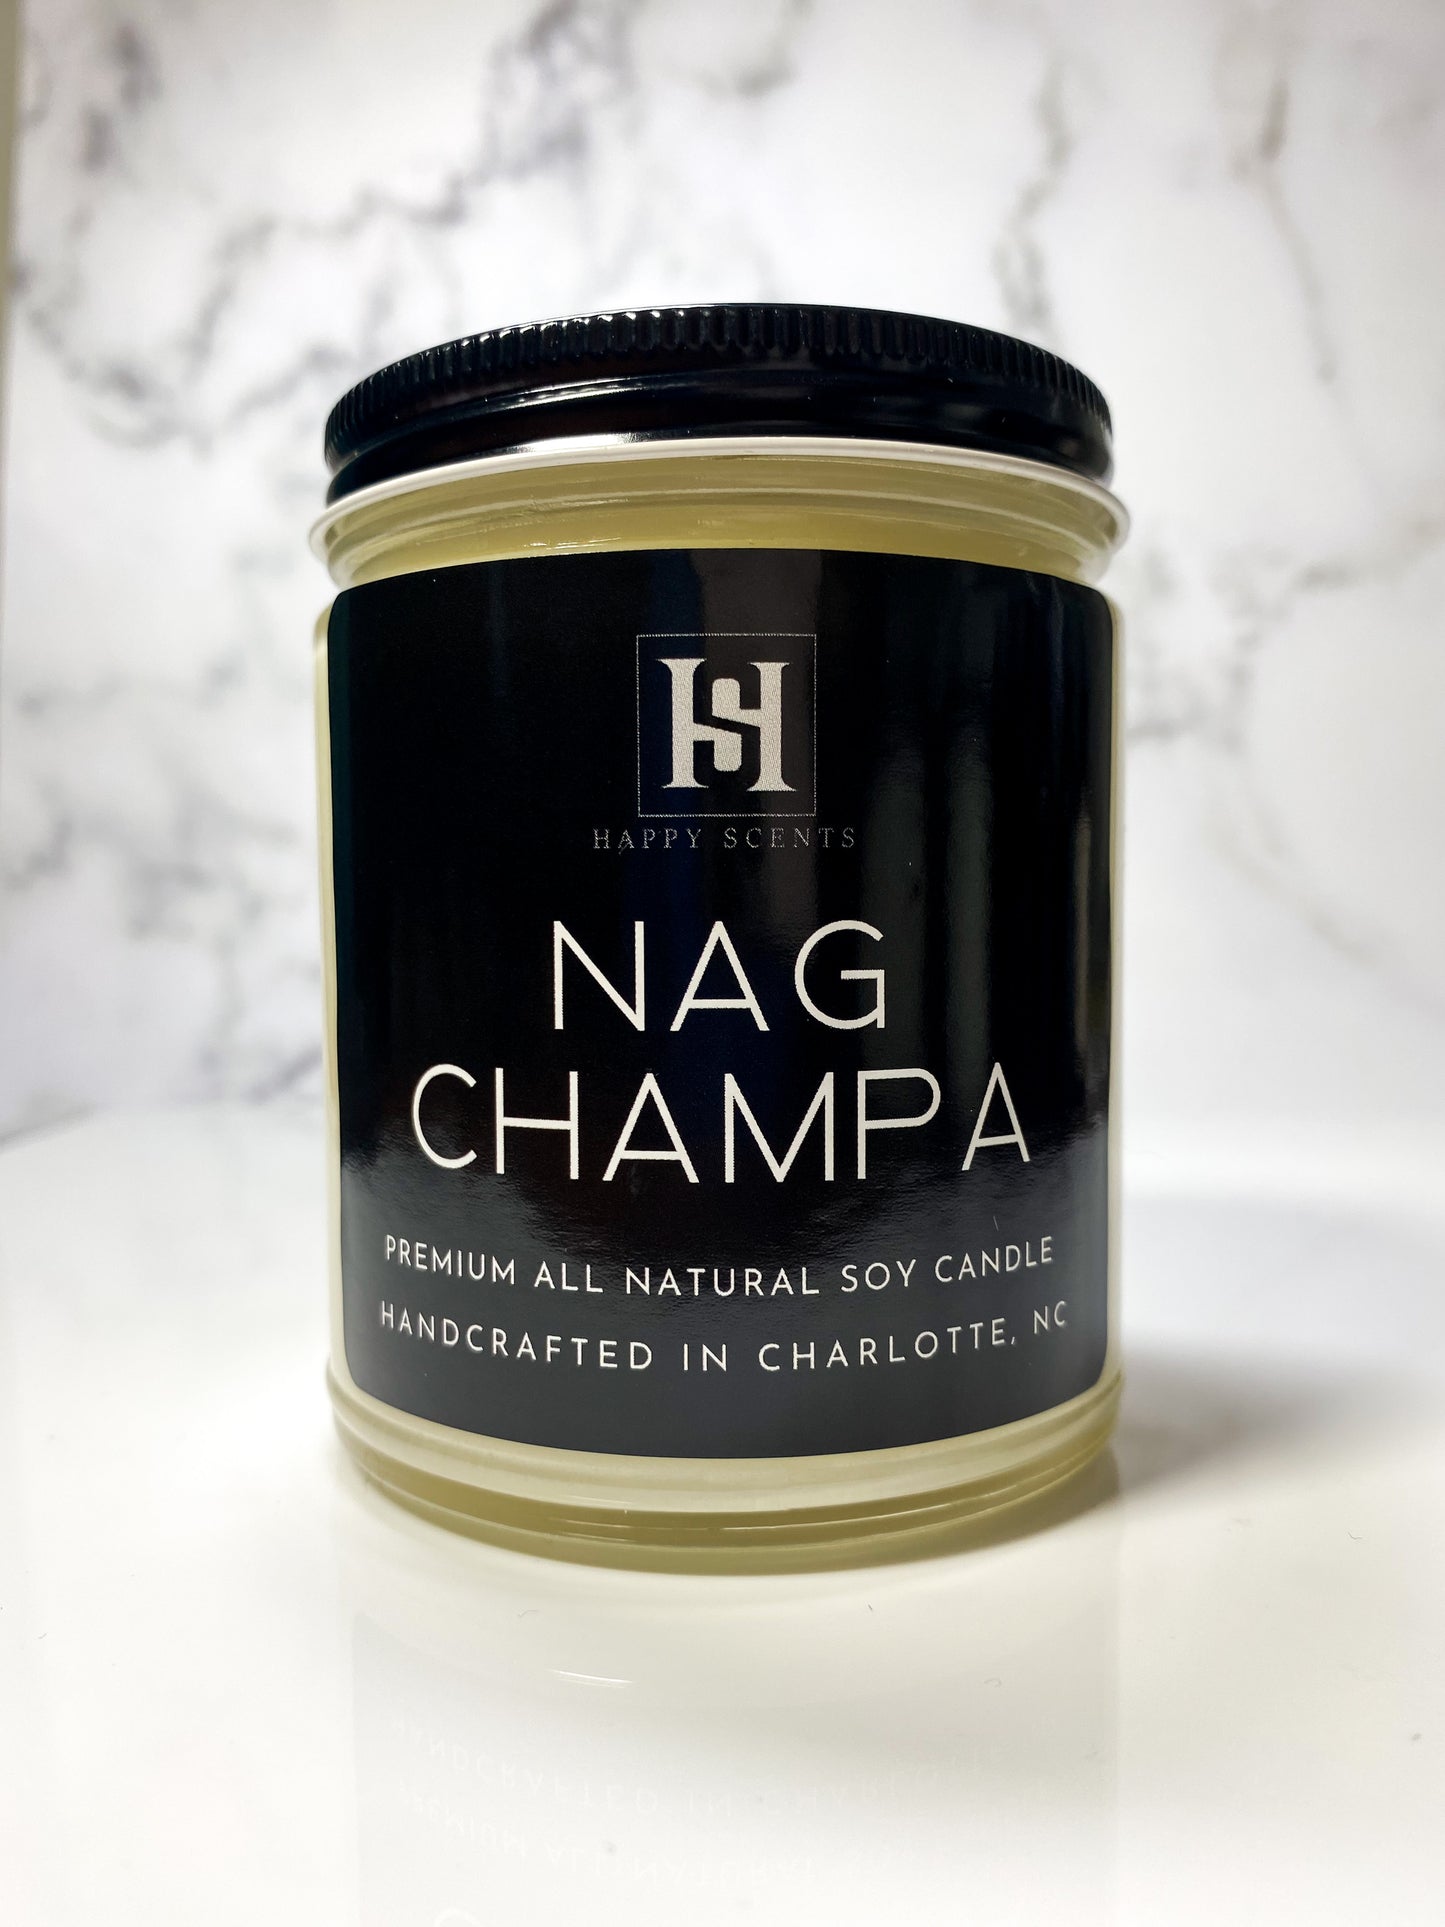 Nag Champa candle by Happy Scents